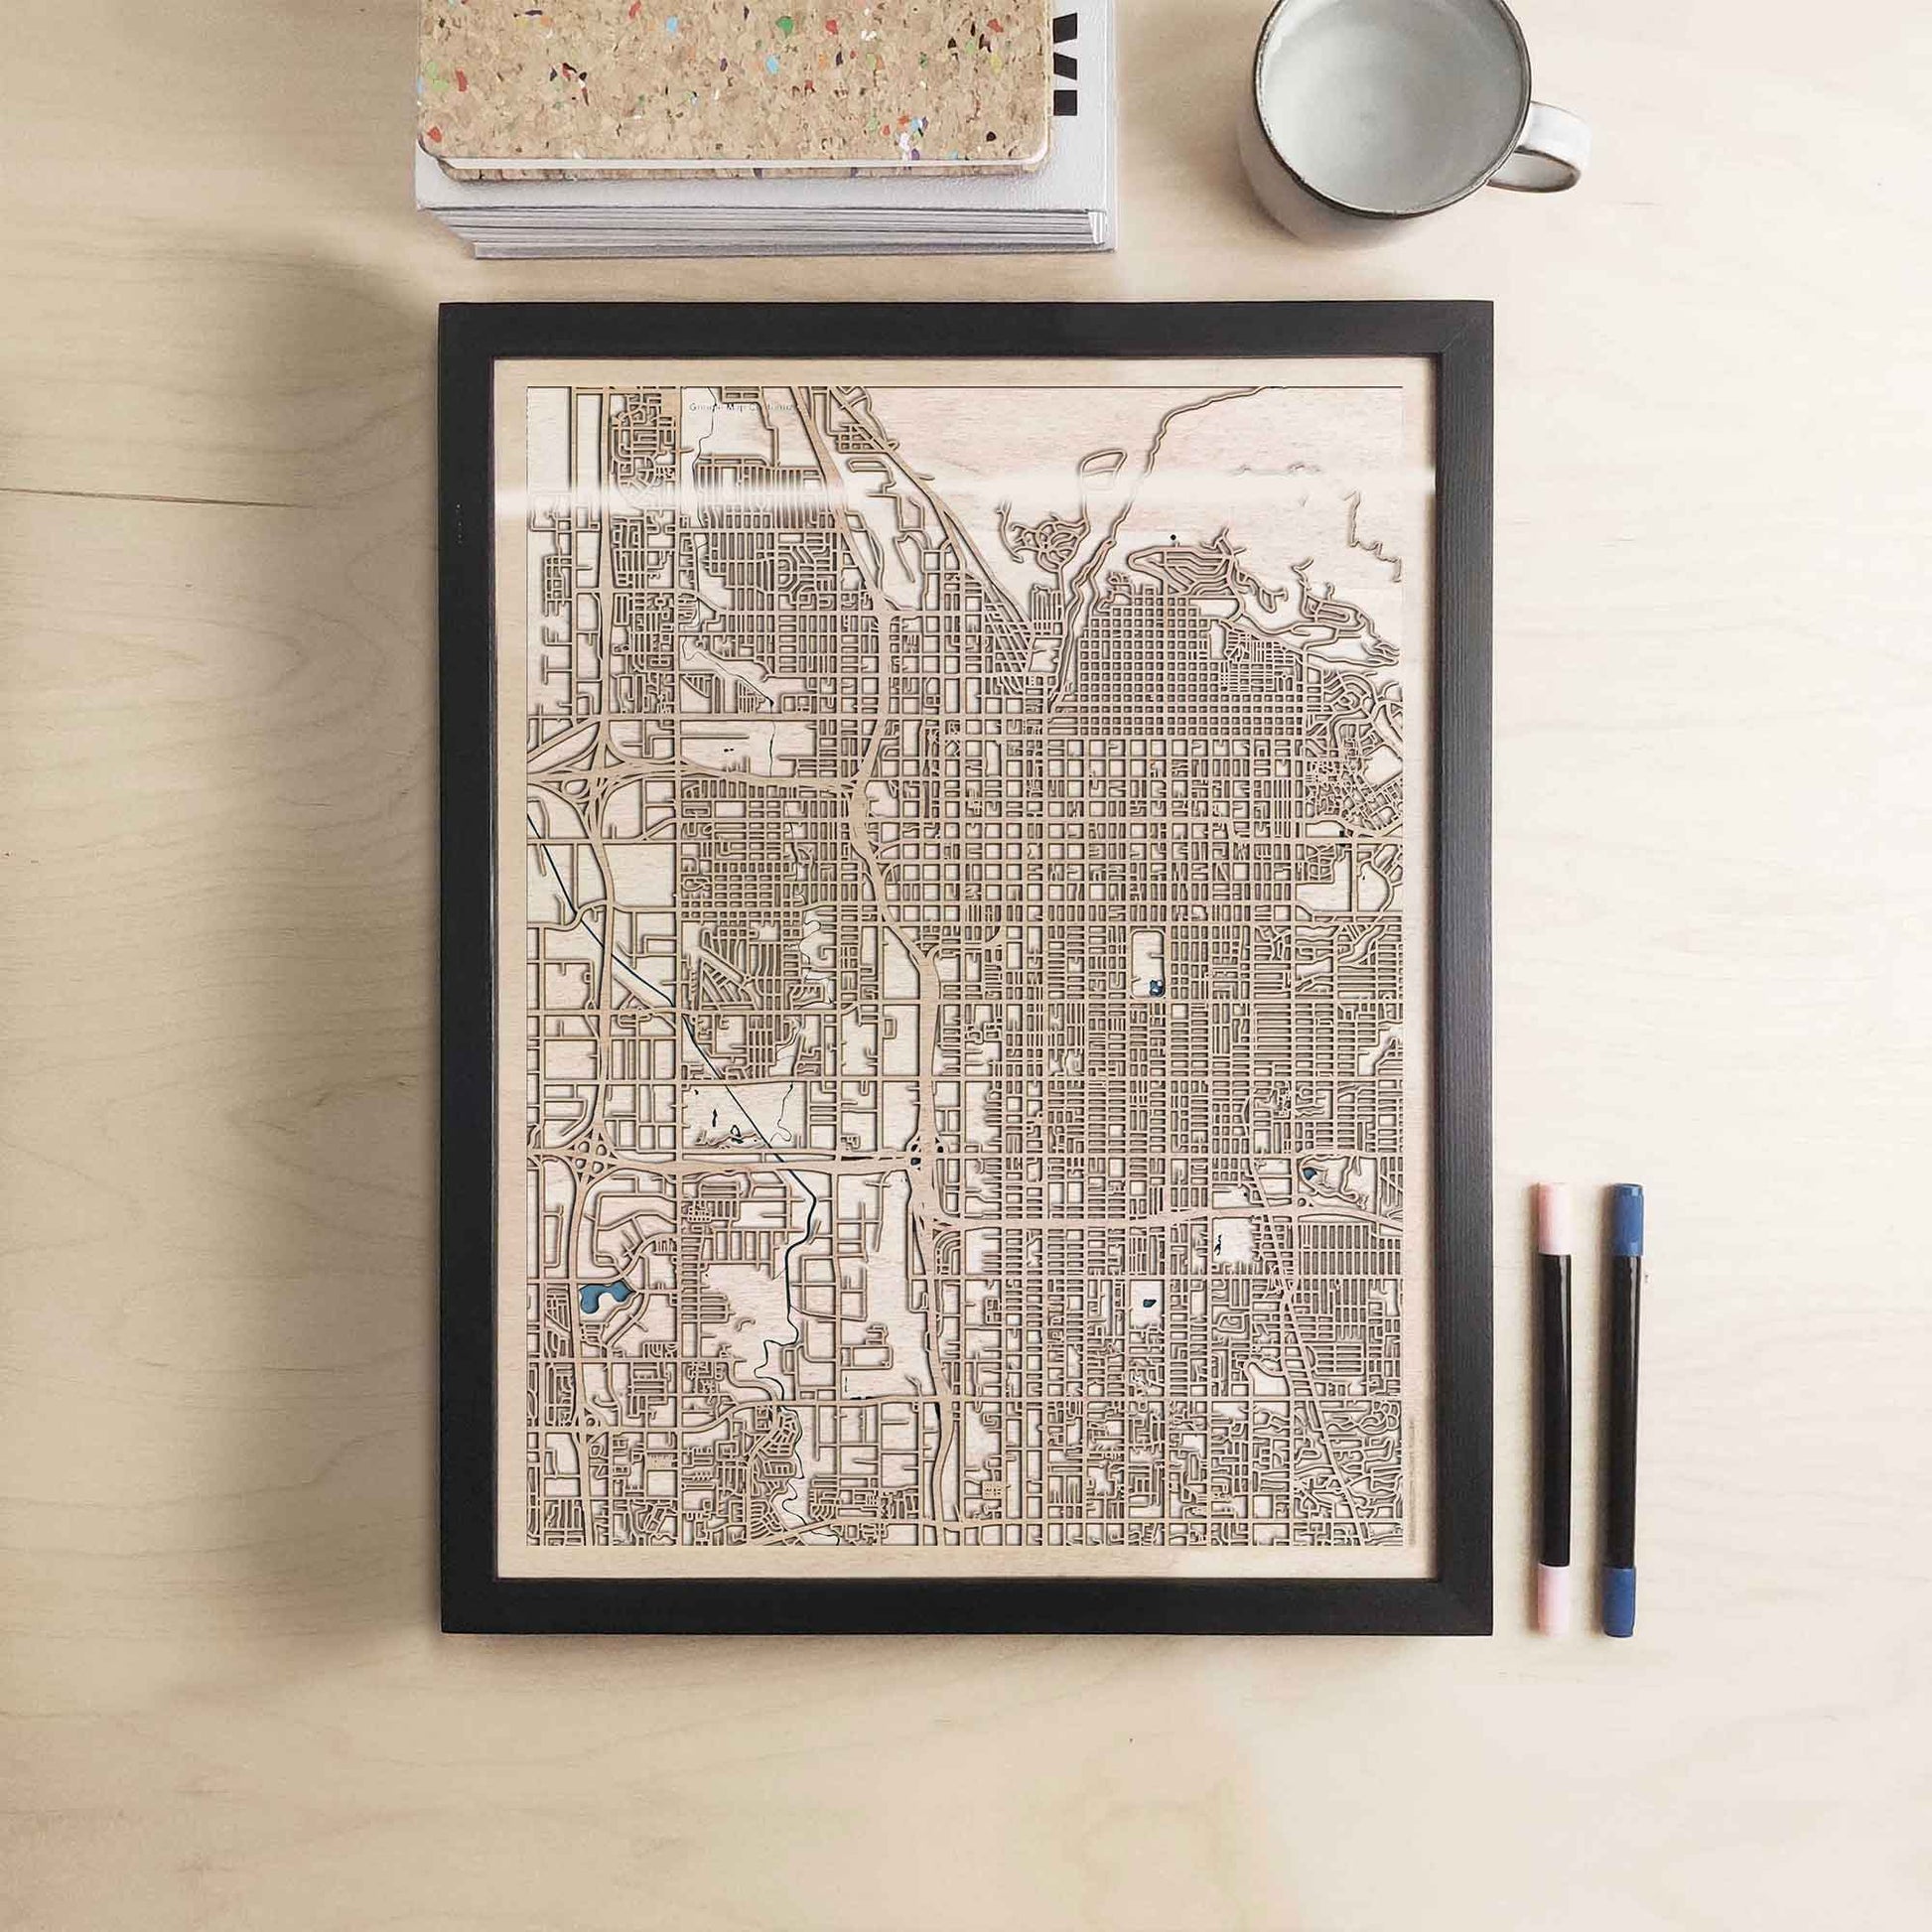 Salt Lake City Wooden Map by CityWood - Custom Wood Map Art - Unique Laser Cut Engraved - Anniversary Gift